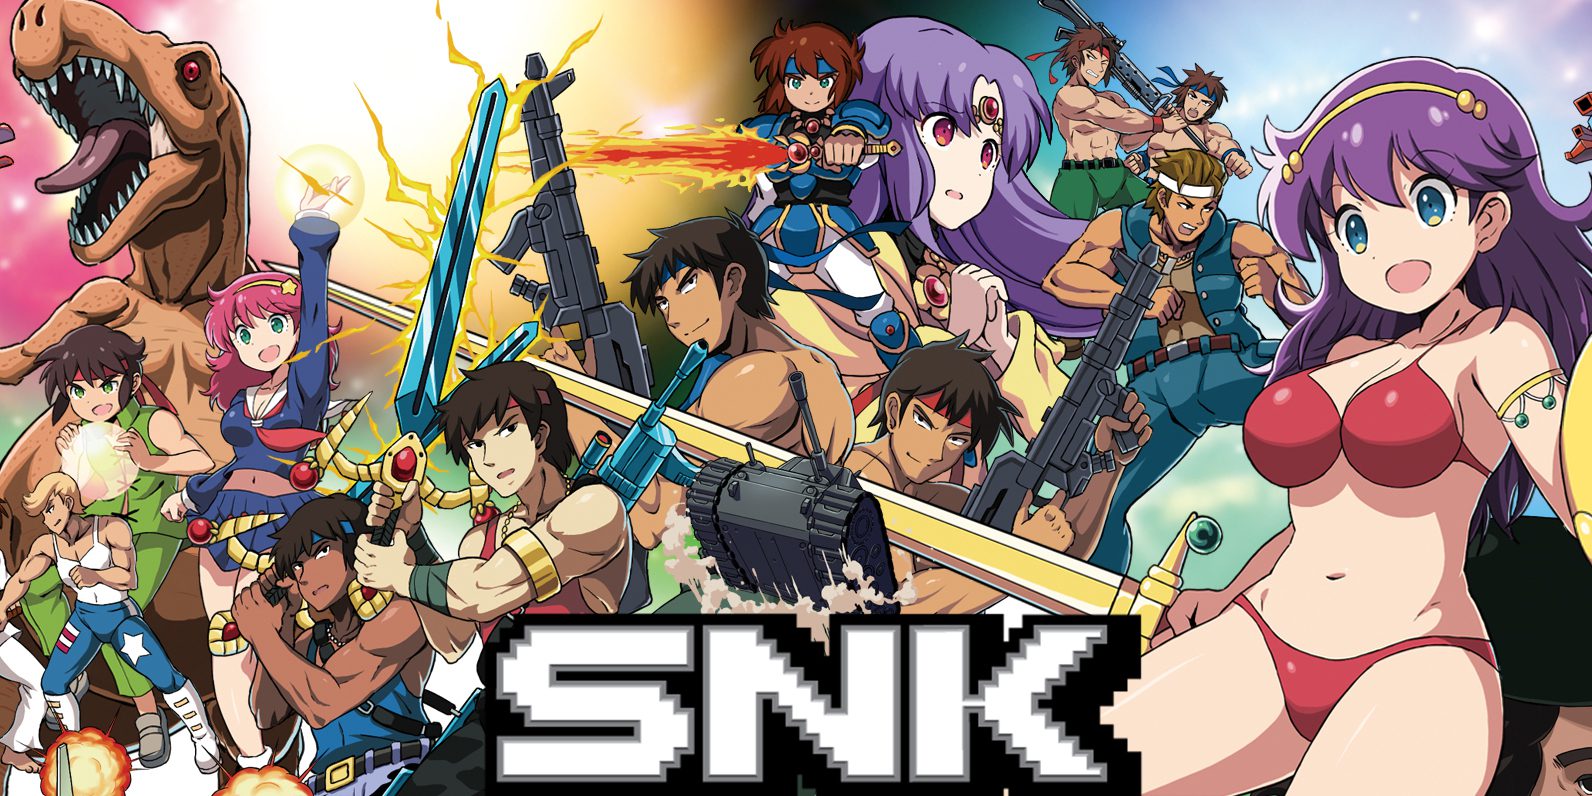 Crown Prince Of Saudi Arabia Hopes To Acquire Majority Ownership Of SNK